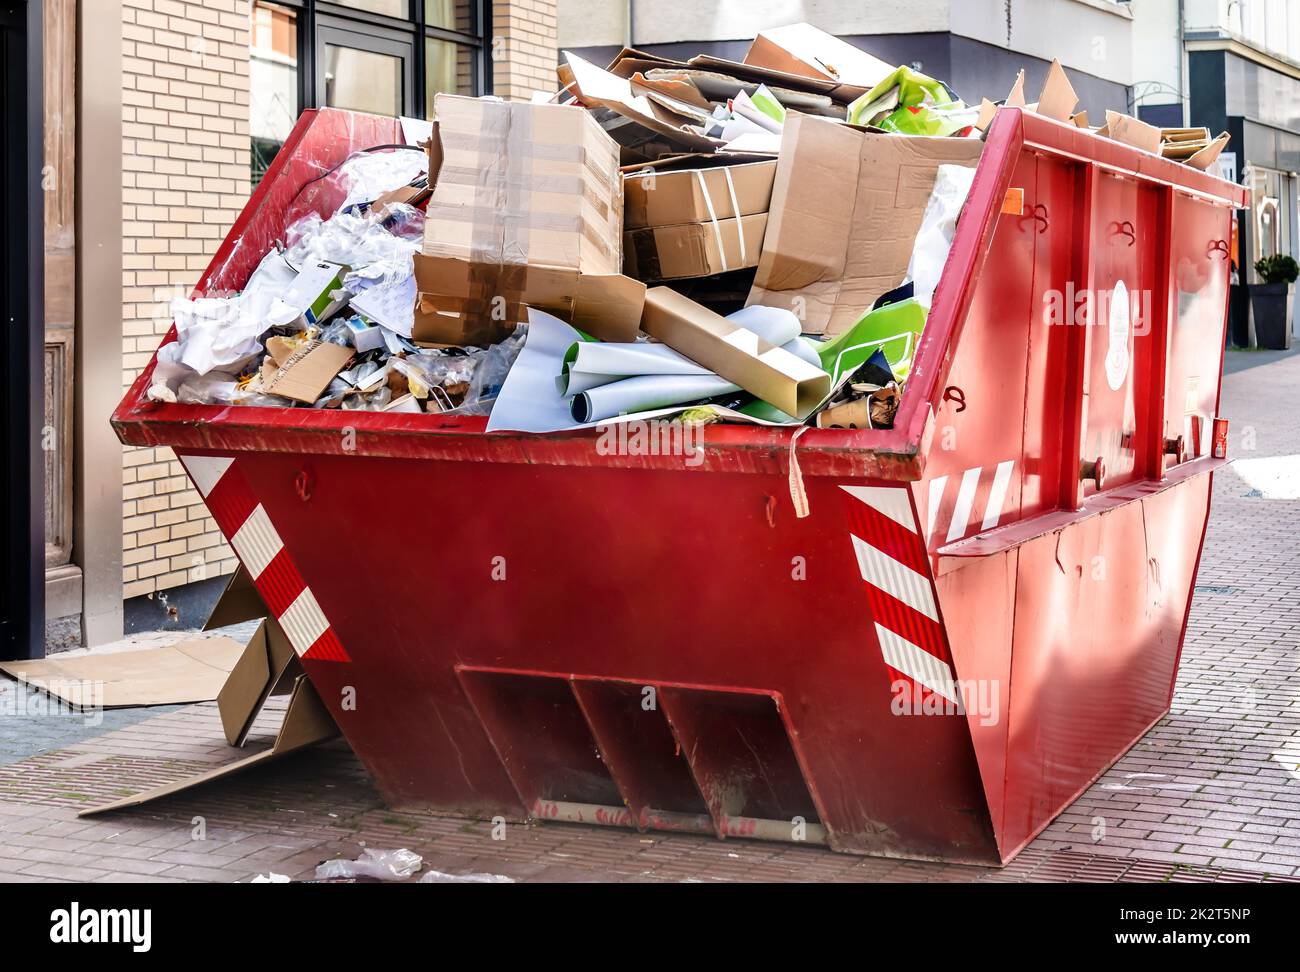 https://c8.alamy.com/comp/2K2T5NP/red-container-filled-with-cardboard-trash-2K2T5NP.jpg